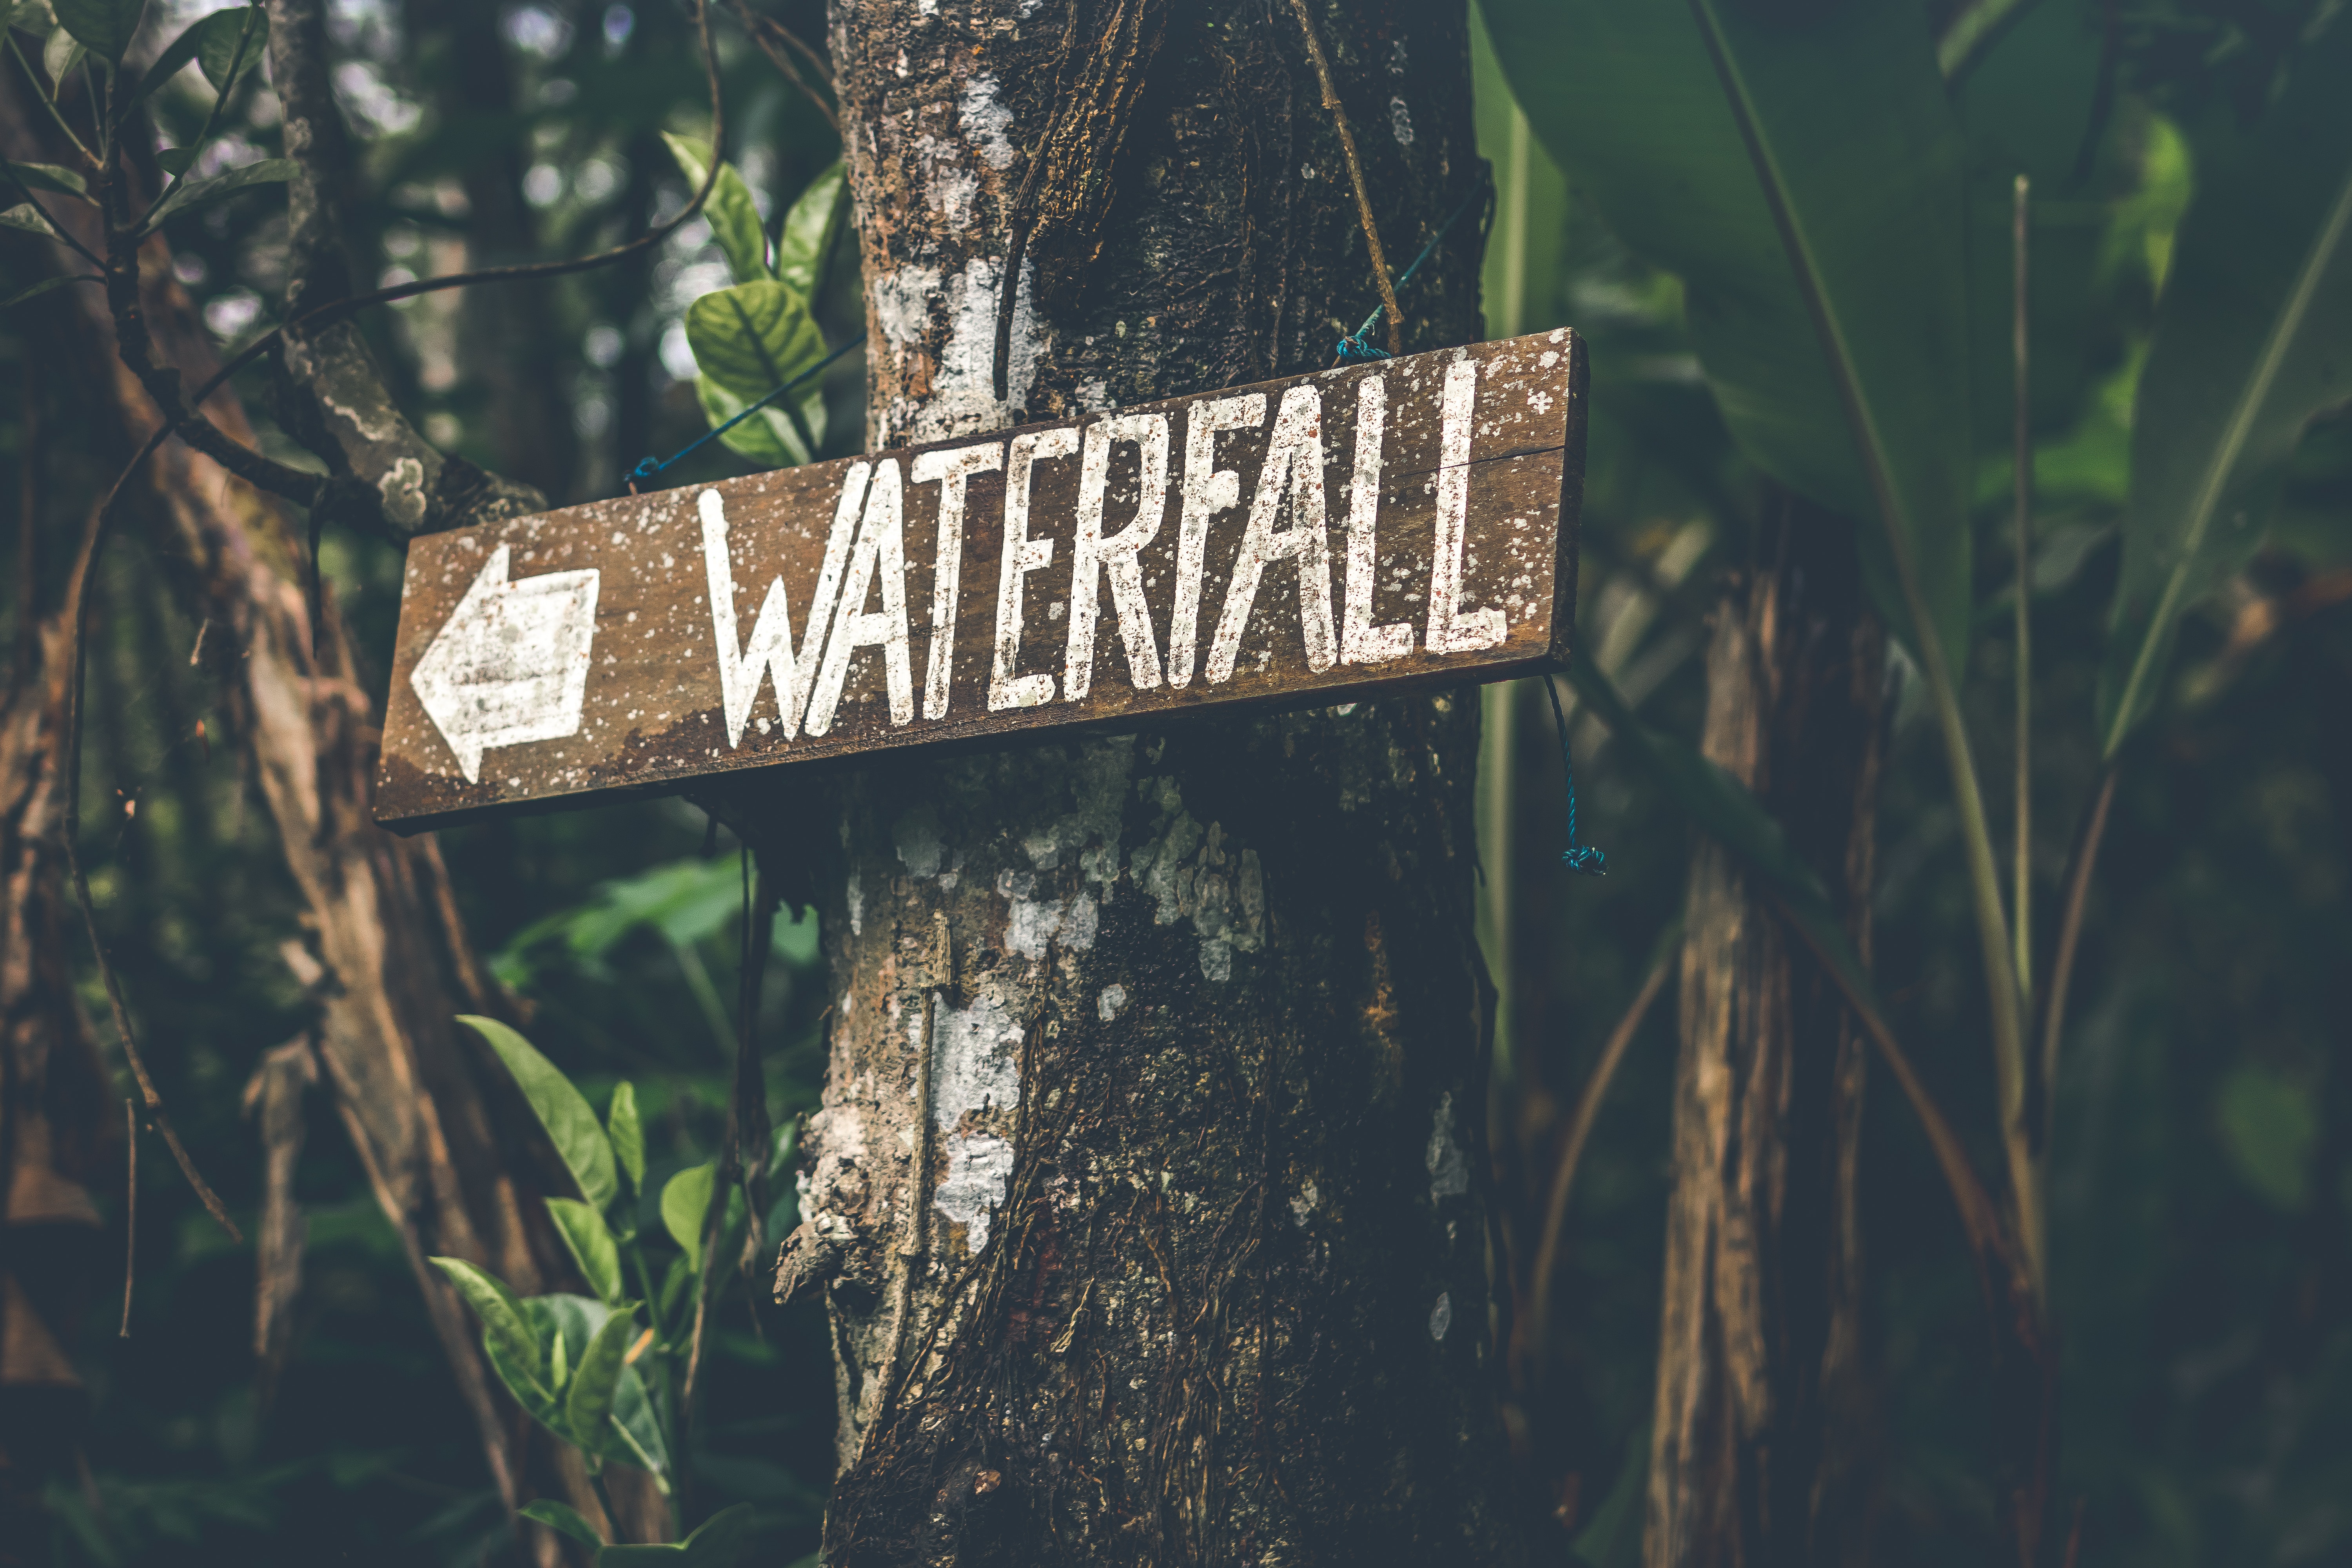 Brown Wooden Waterfall Direction Sign Placed on Brown Tree Bark, Asia, Tourism, Rock, Scenery, HQ Photo